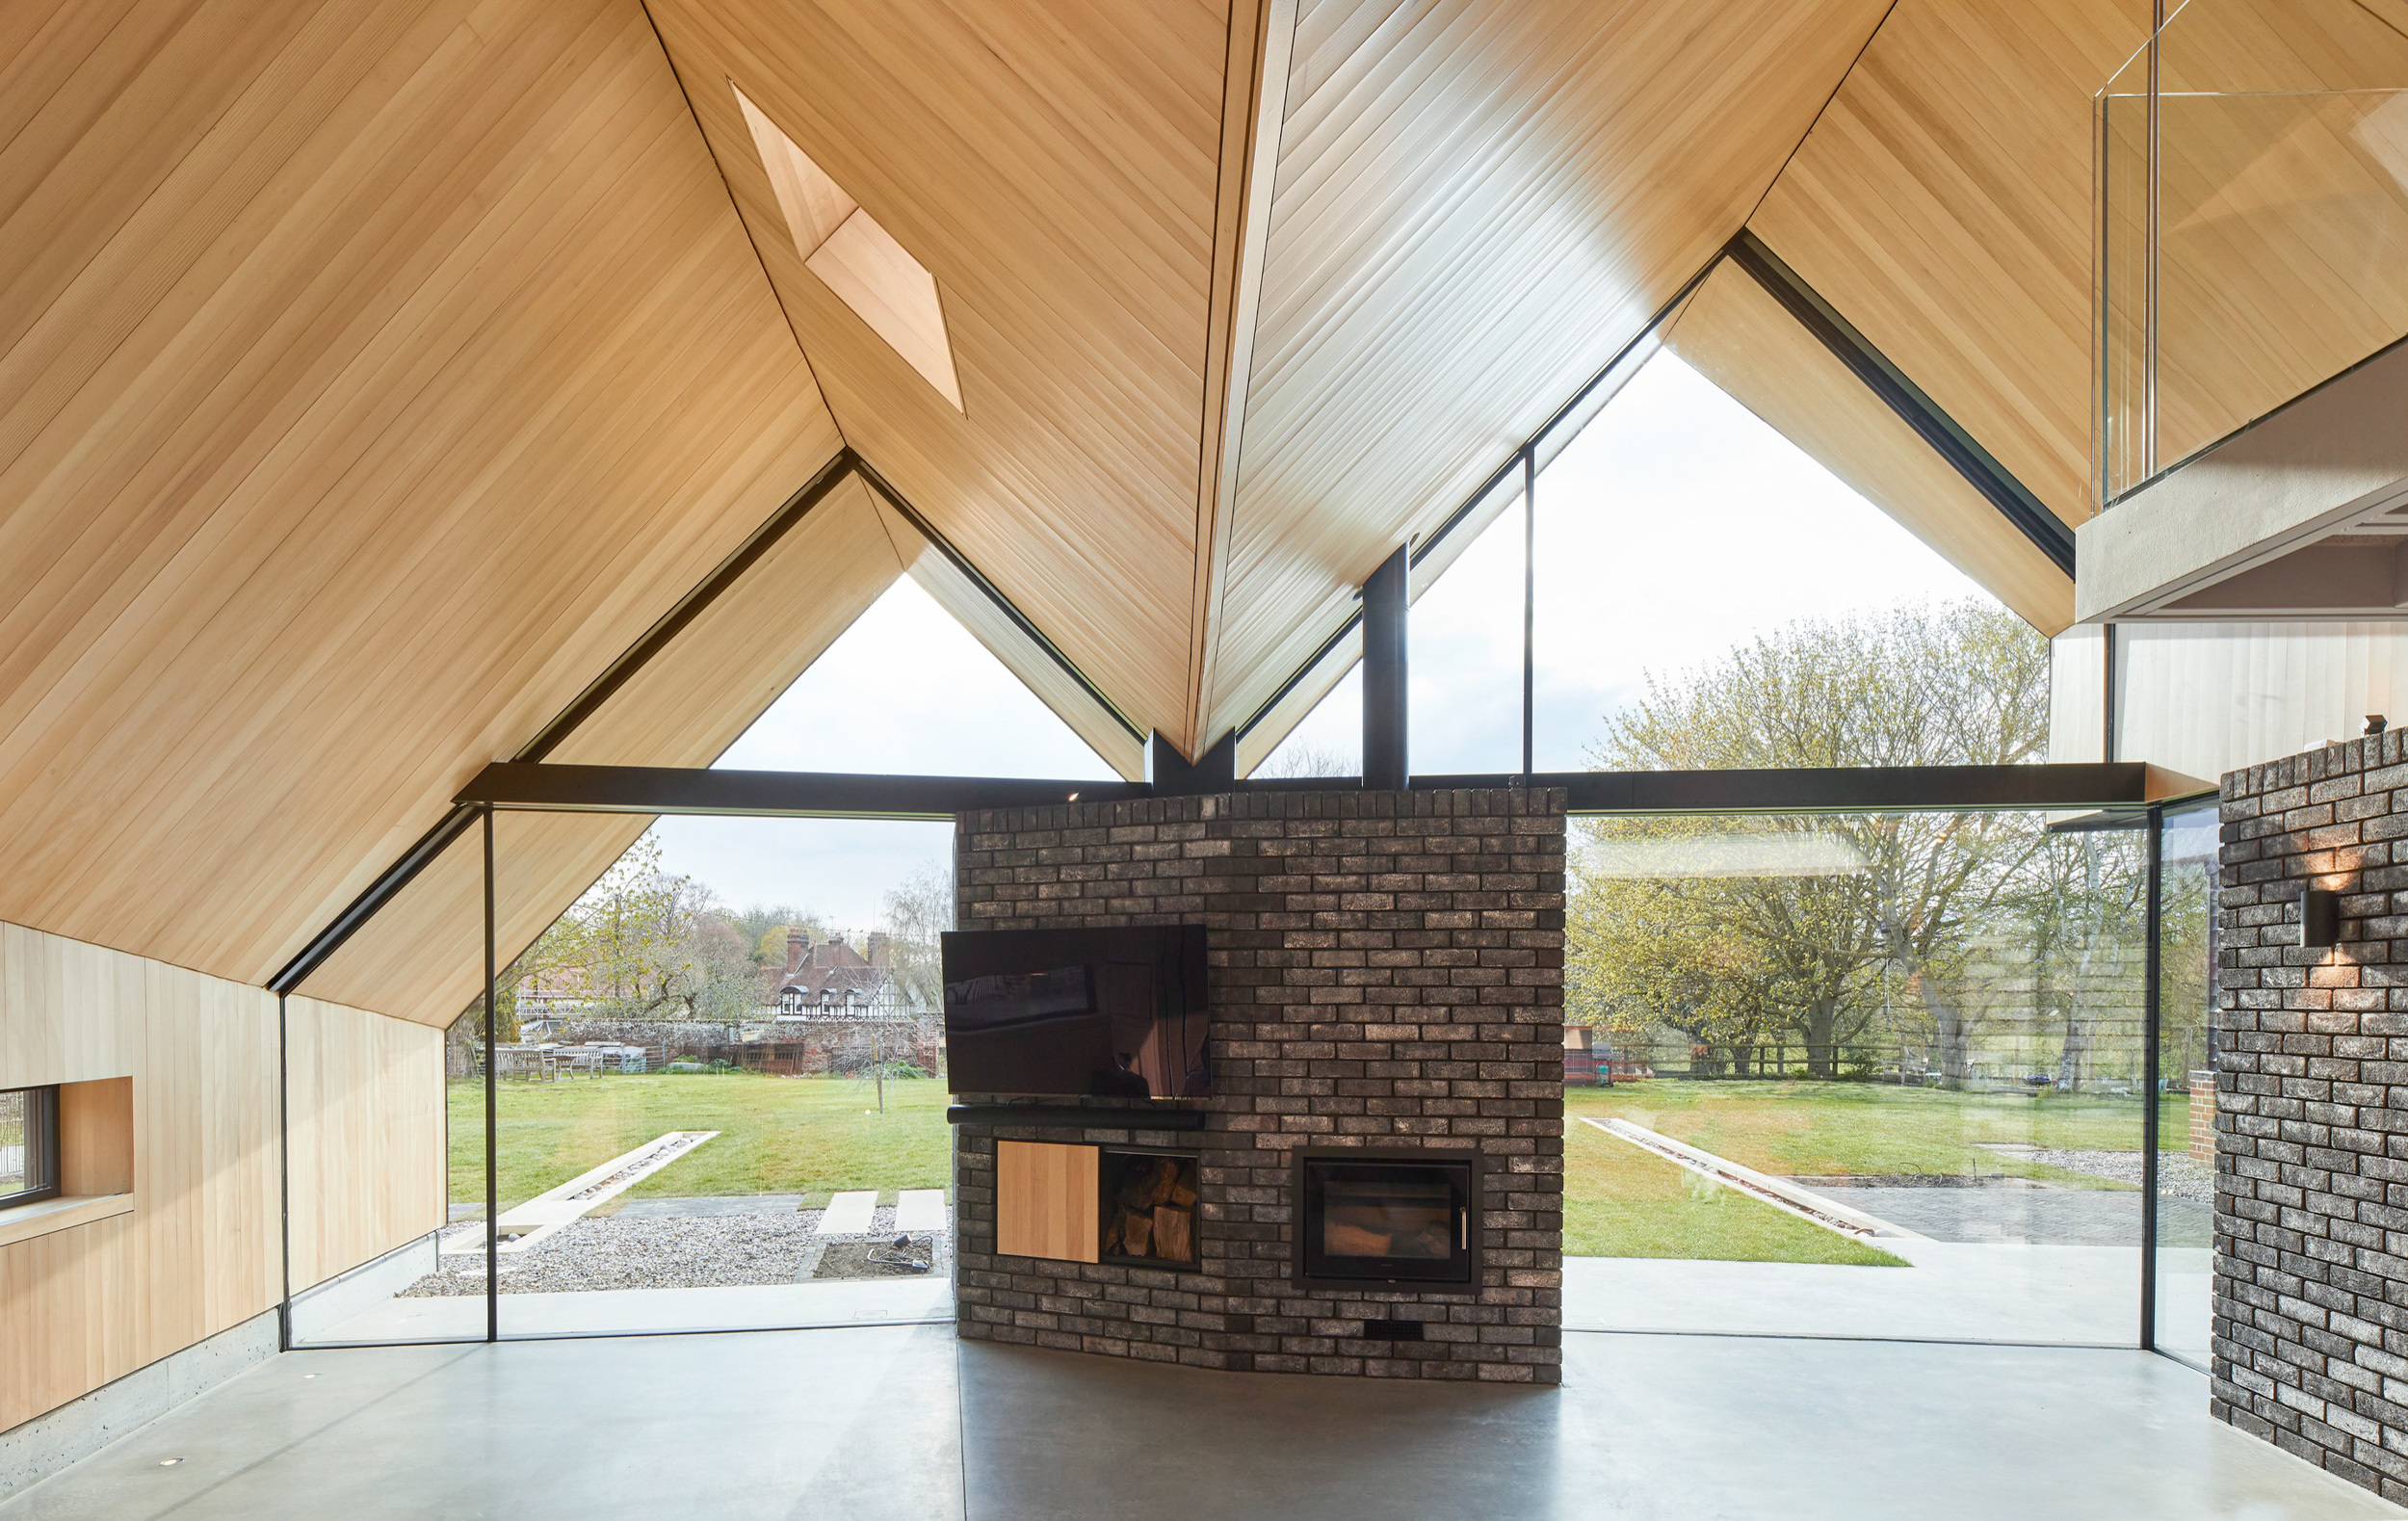 Looking out to fields from house with timber pitch roof | cdc studio cambridge architects